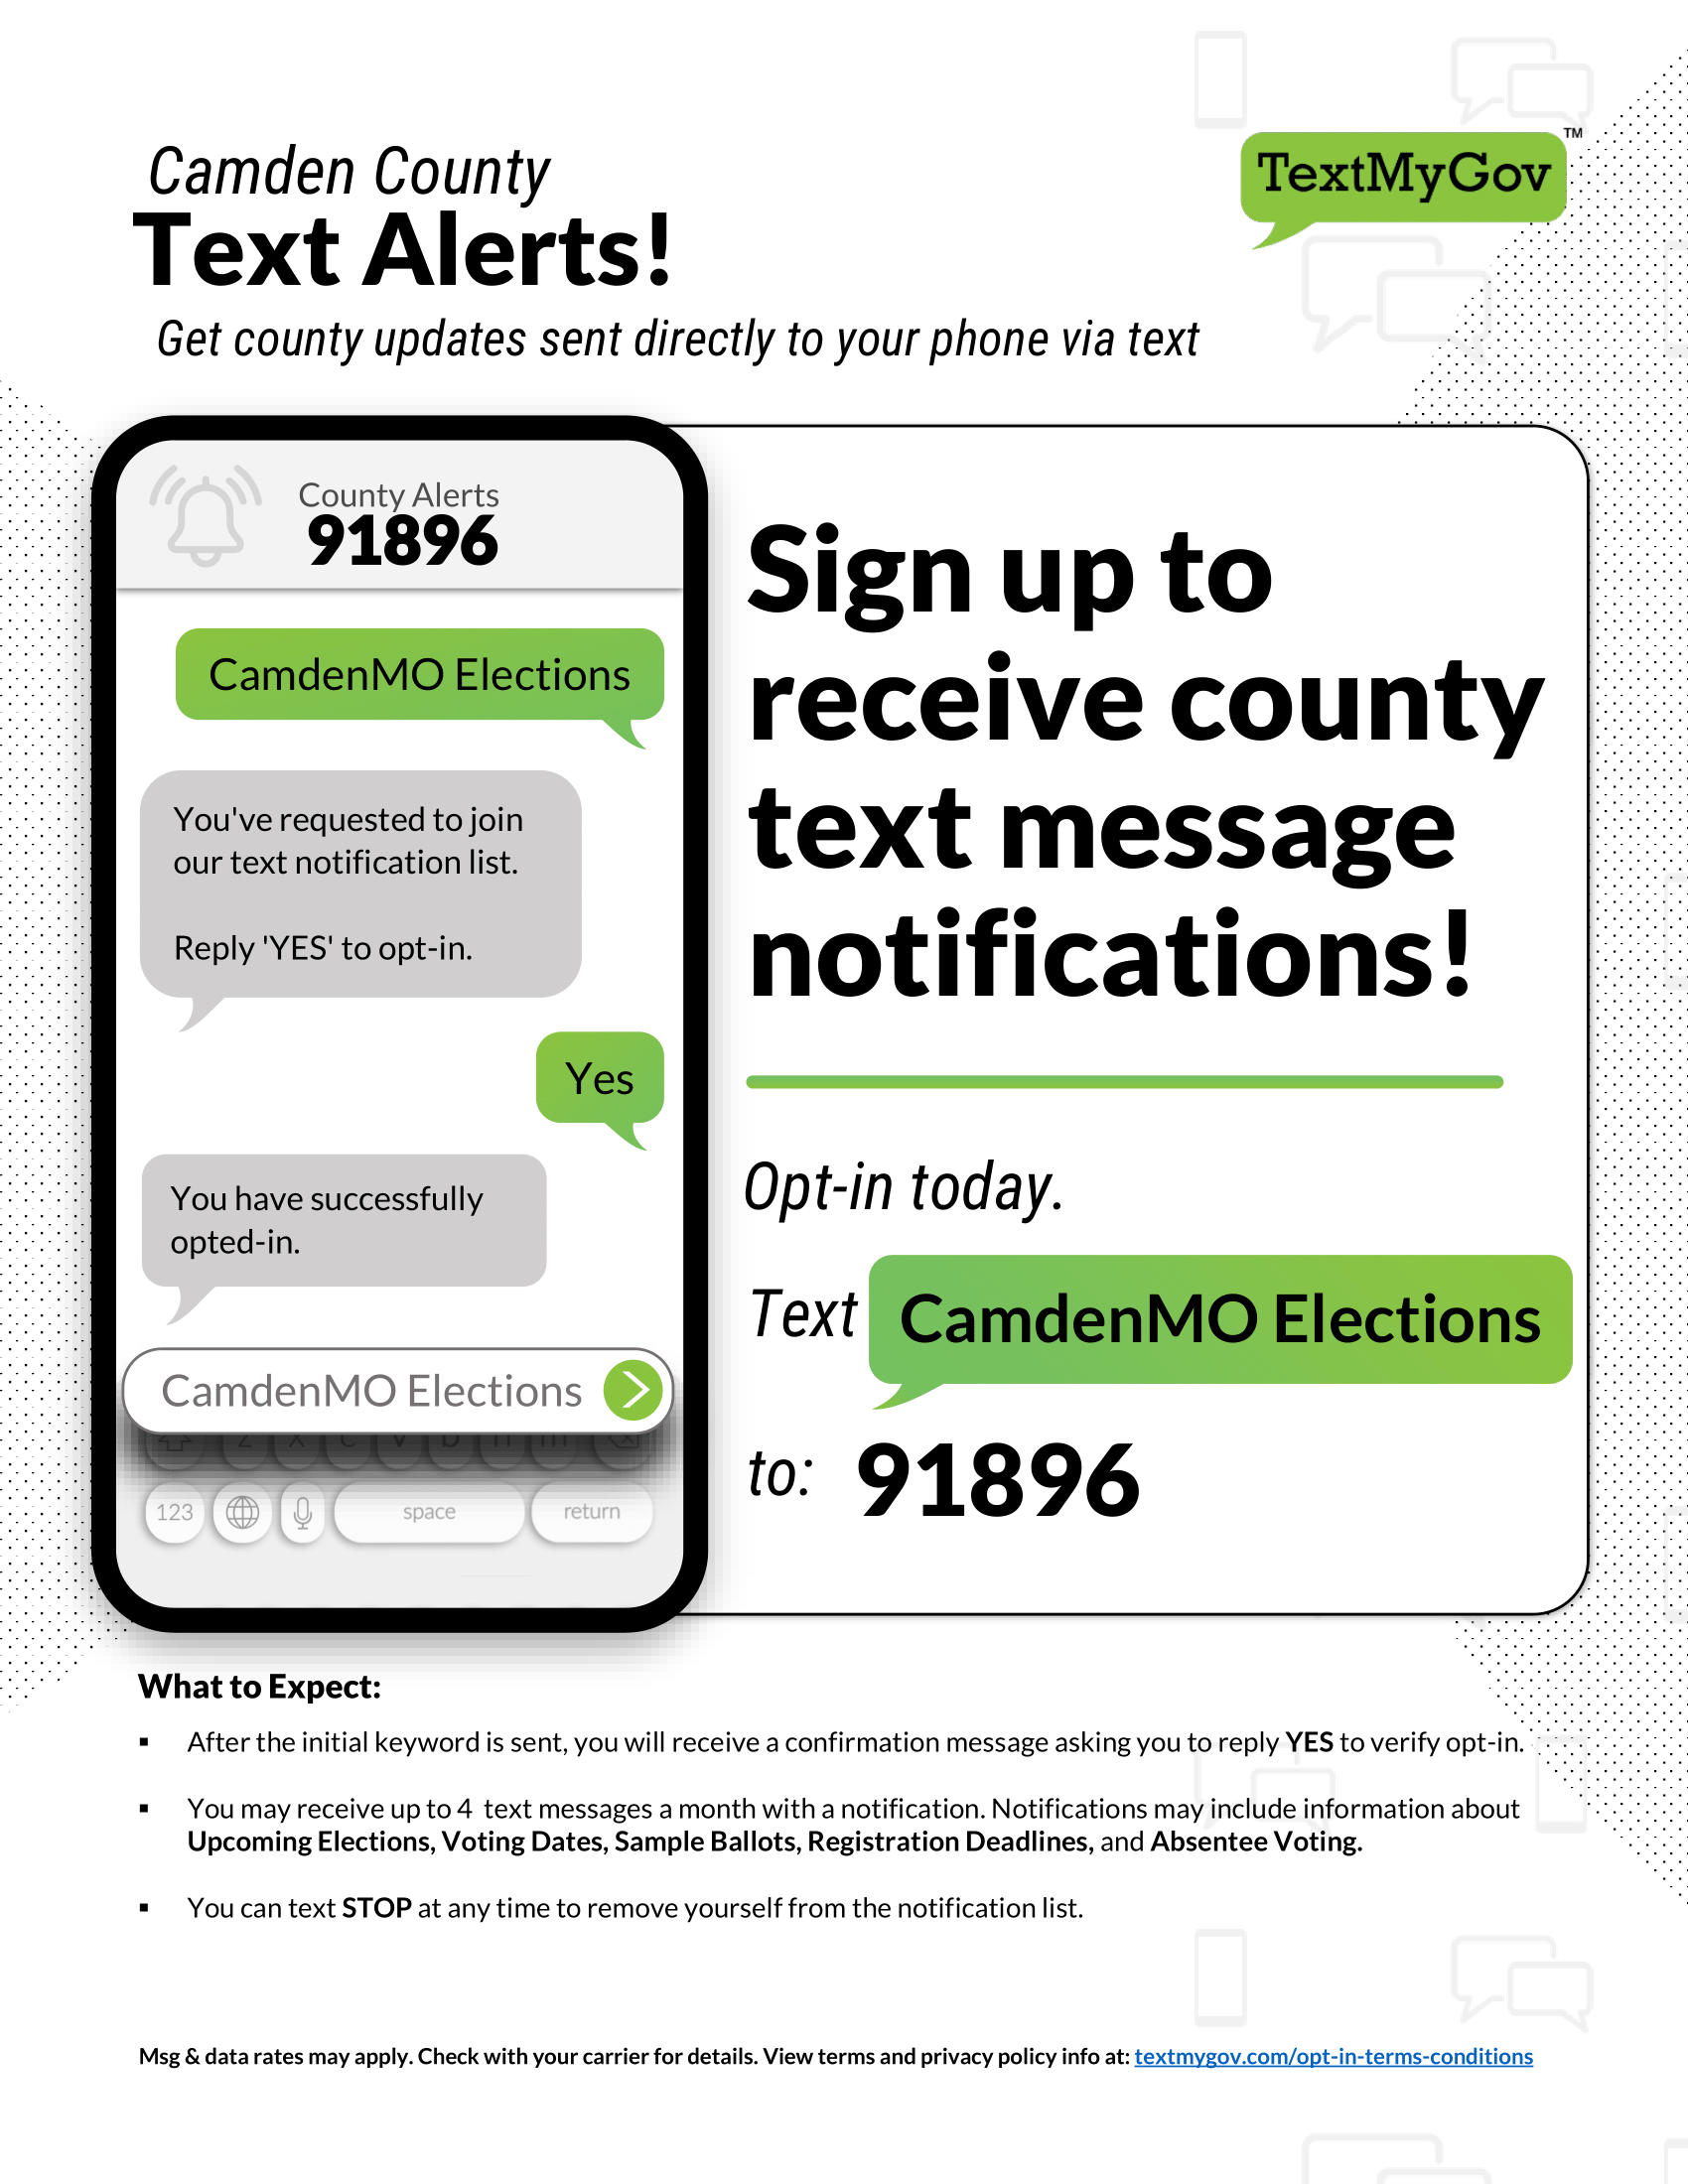 TextMyGov flyer- Text CAMDENMOELECTIONS to the number 91896